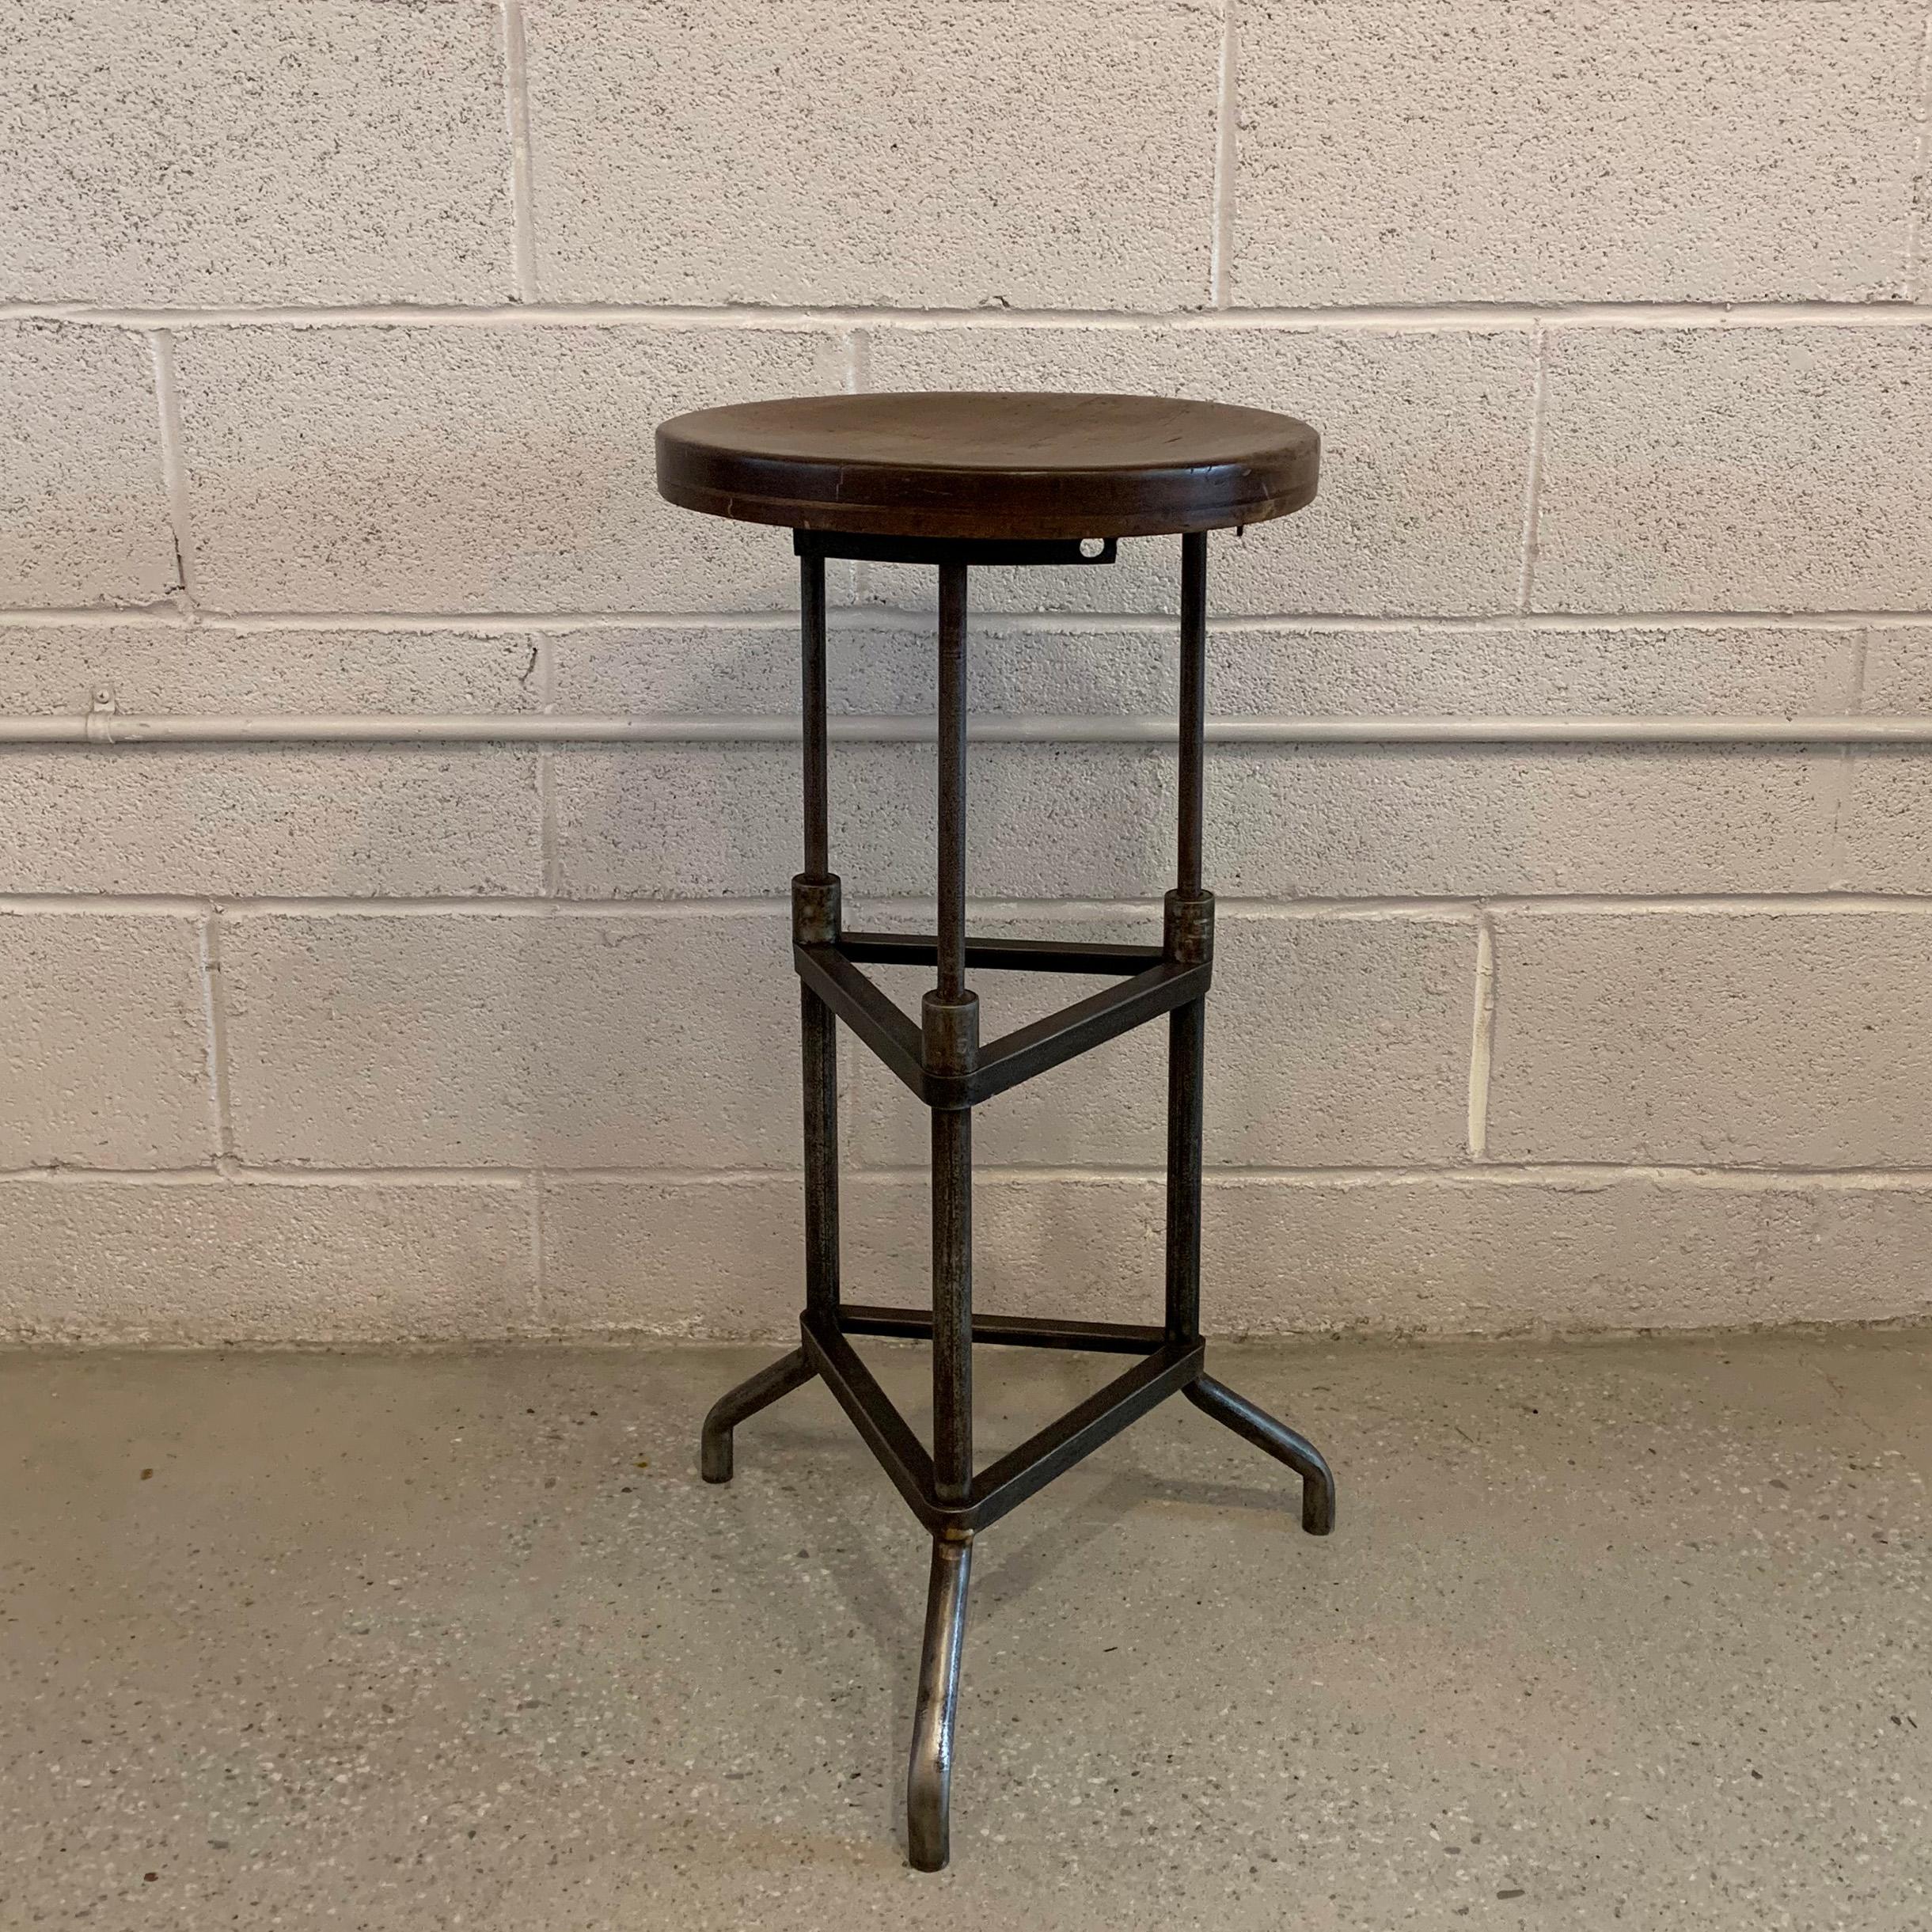 Industrial, early 20th century, drafting stool features a tripod, brushed steel base with 14 inch round maple seat.